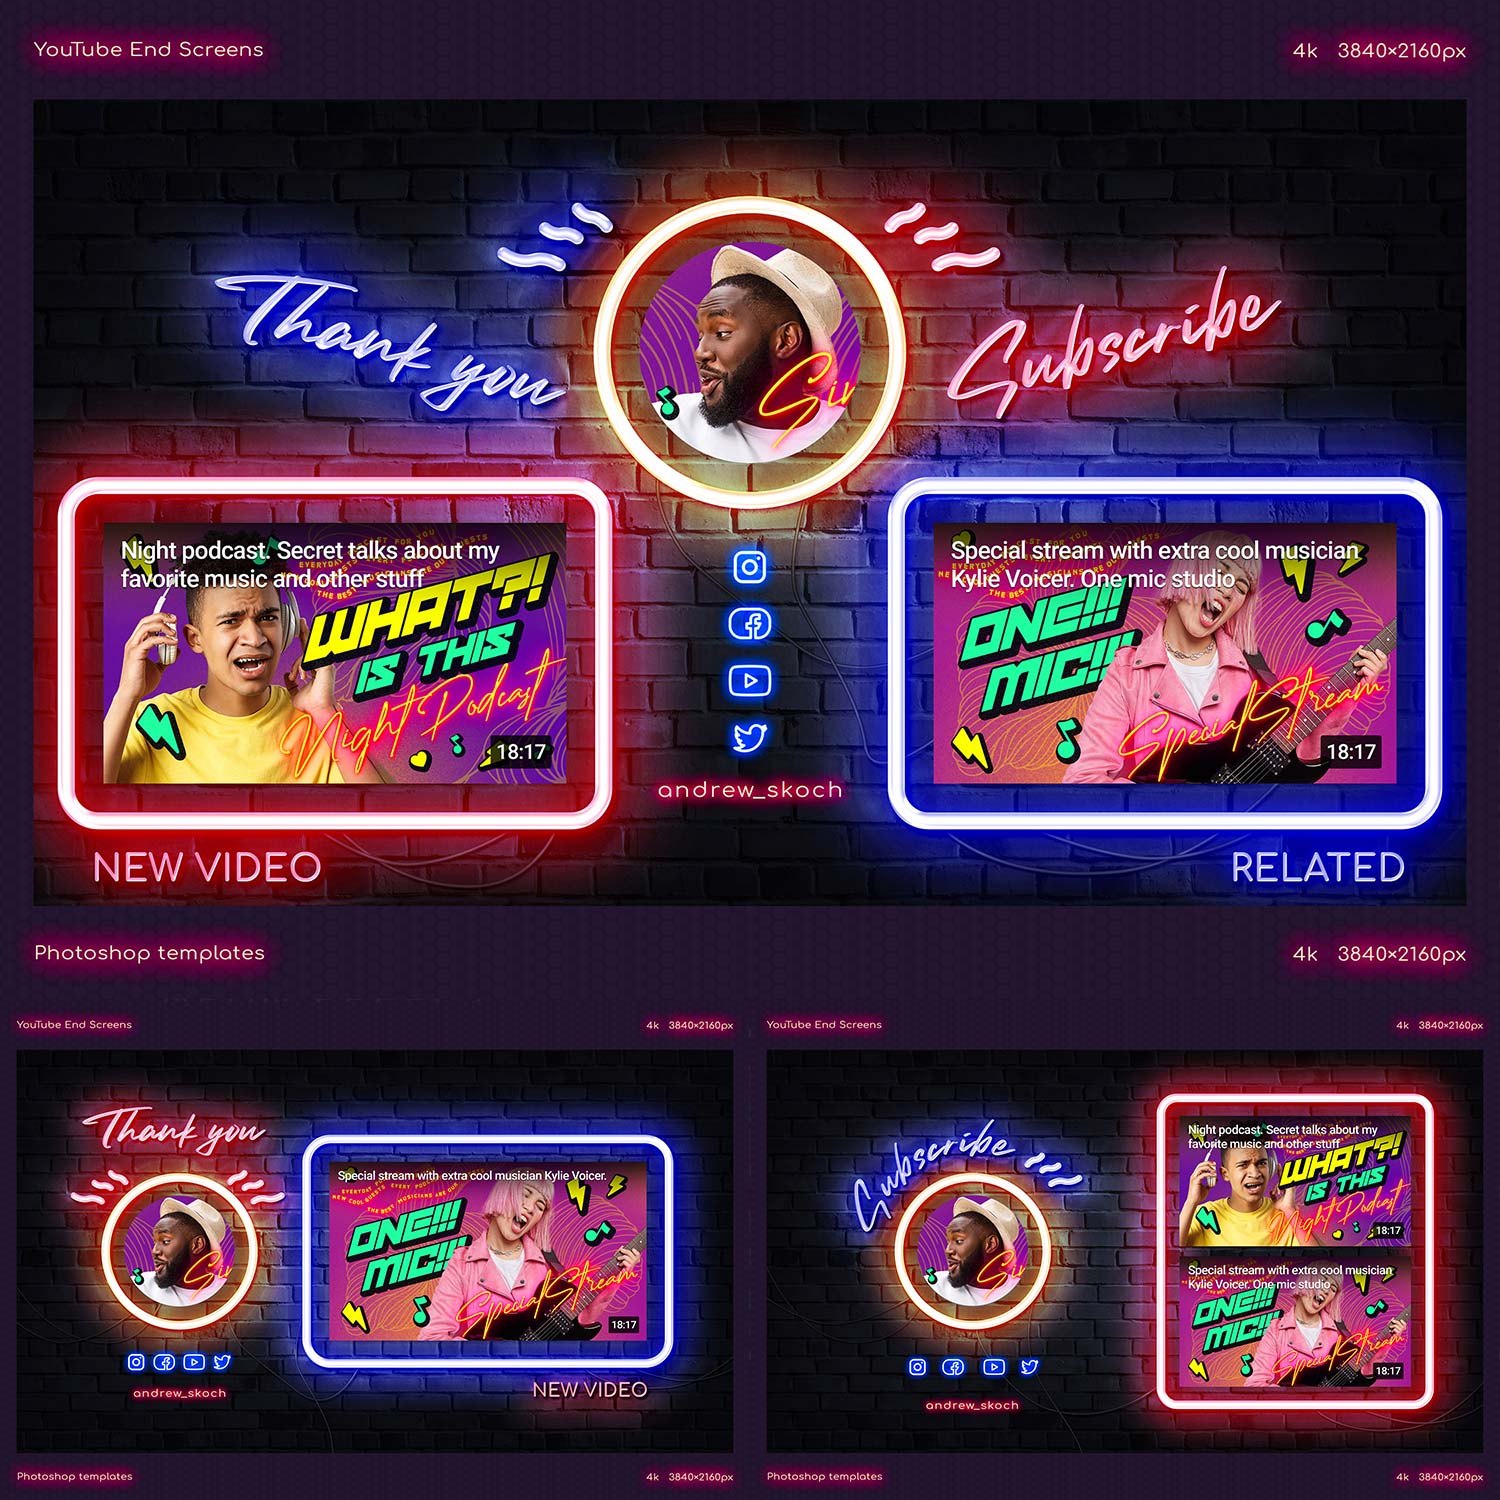 Neon YouTube End Screens preview image.